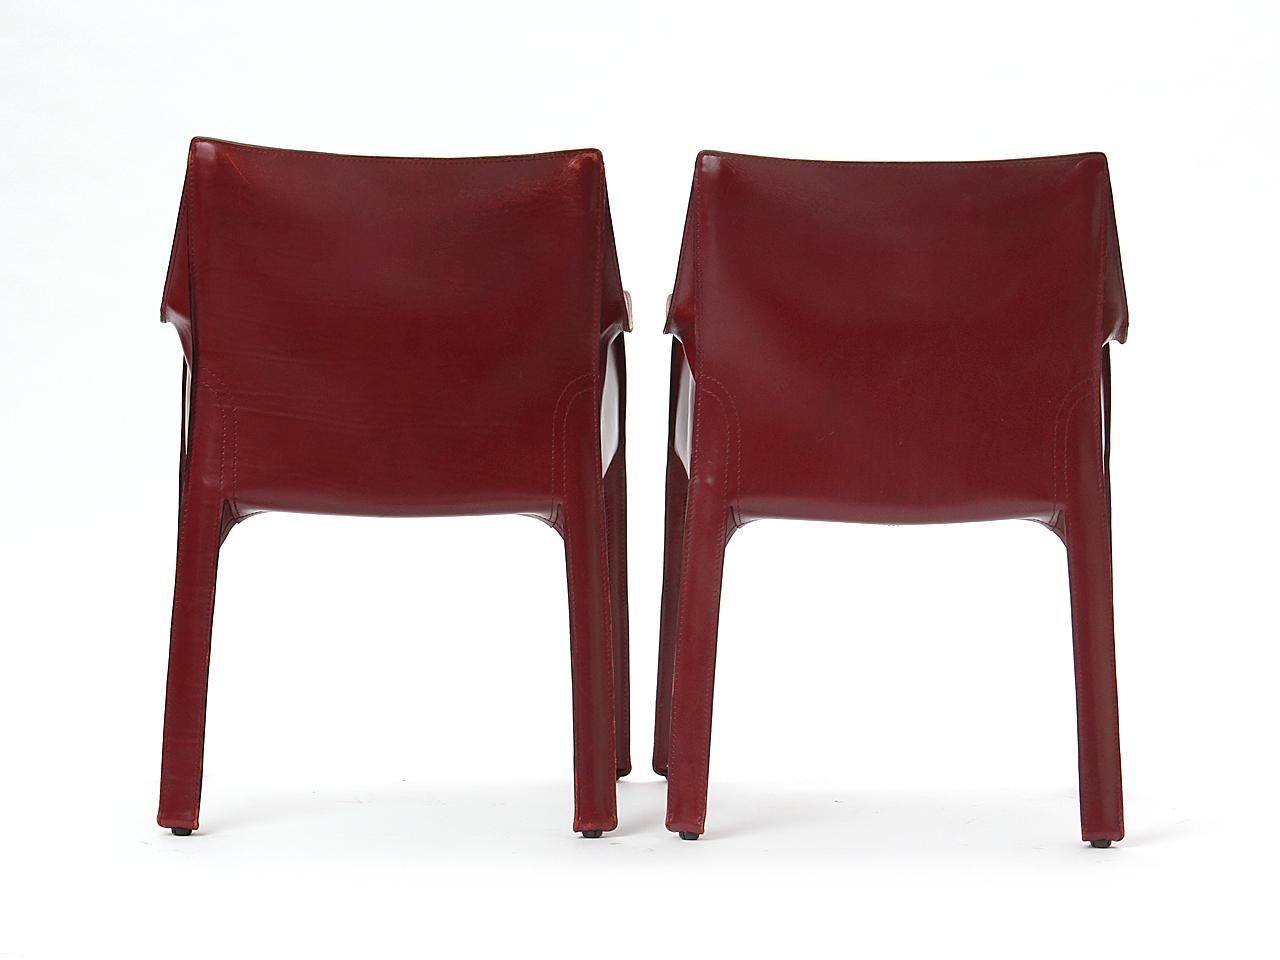 Late 20th Century 1970s Pair of Italian Cab Armchairs by Mario Bellini for Cassina